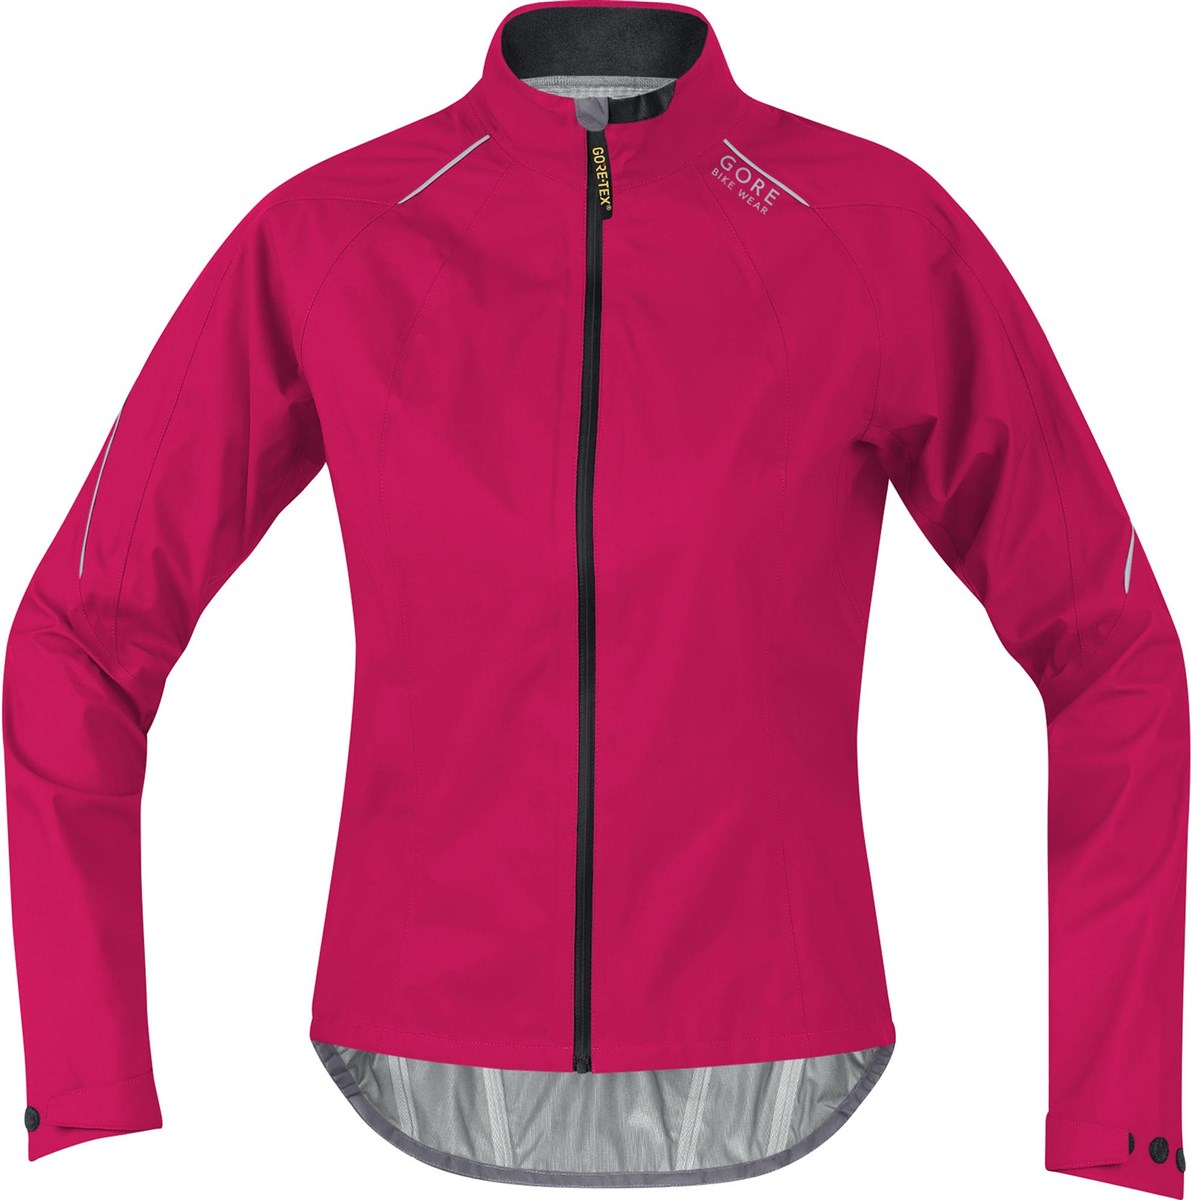 Gore Power Lady Gore-Tex Active Jacket SS17 product image